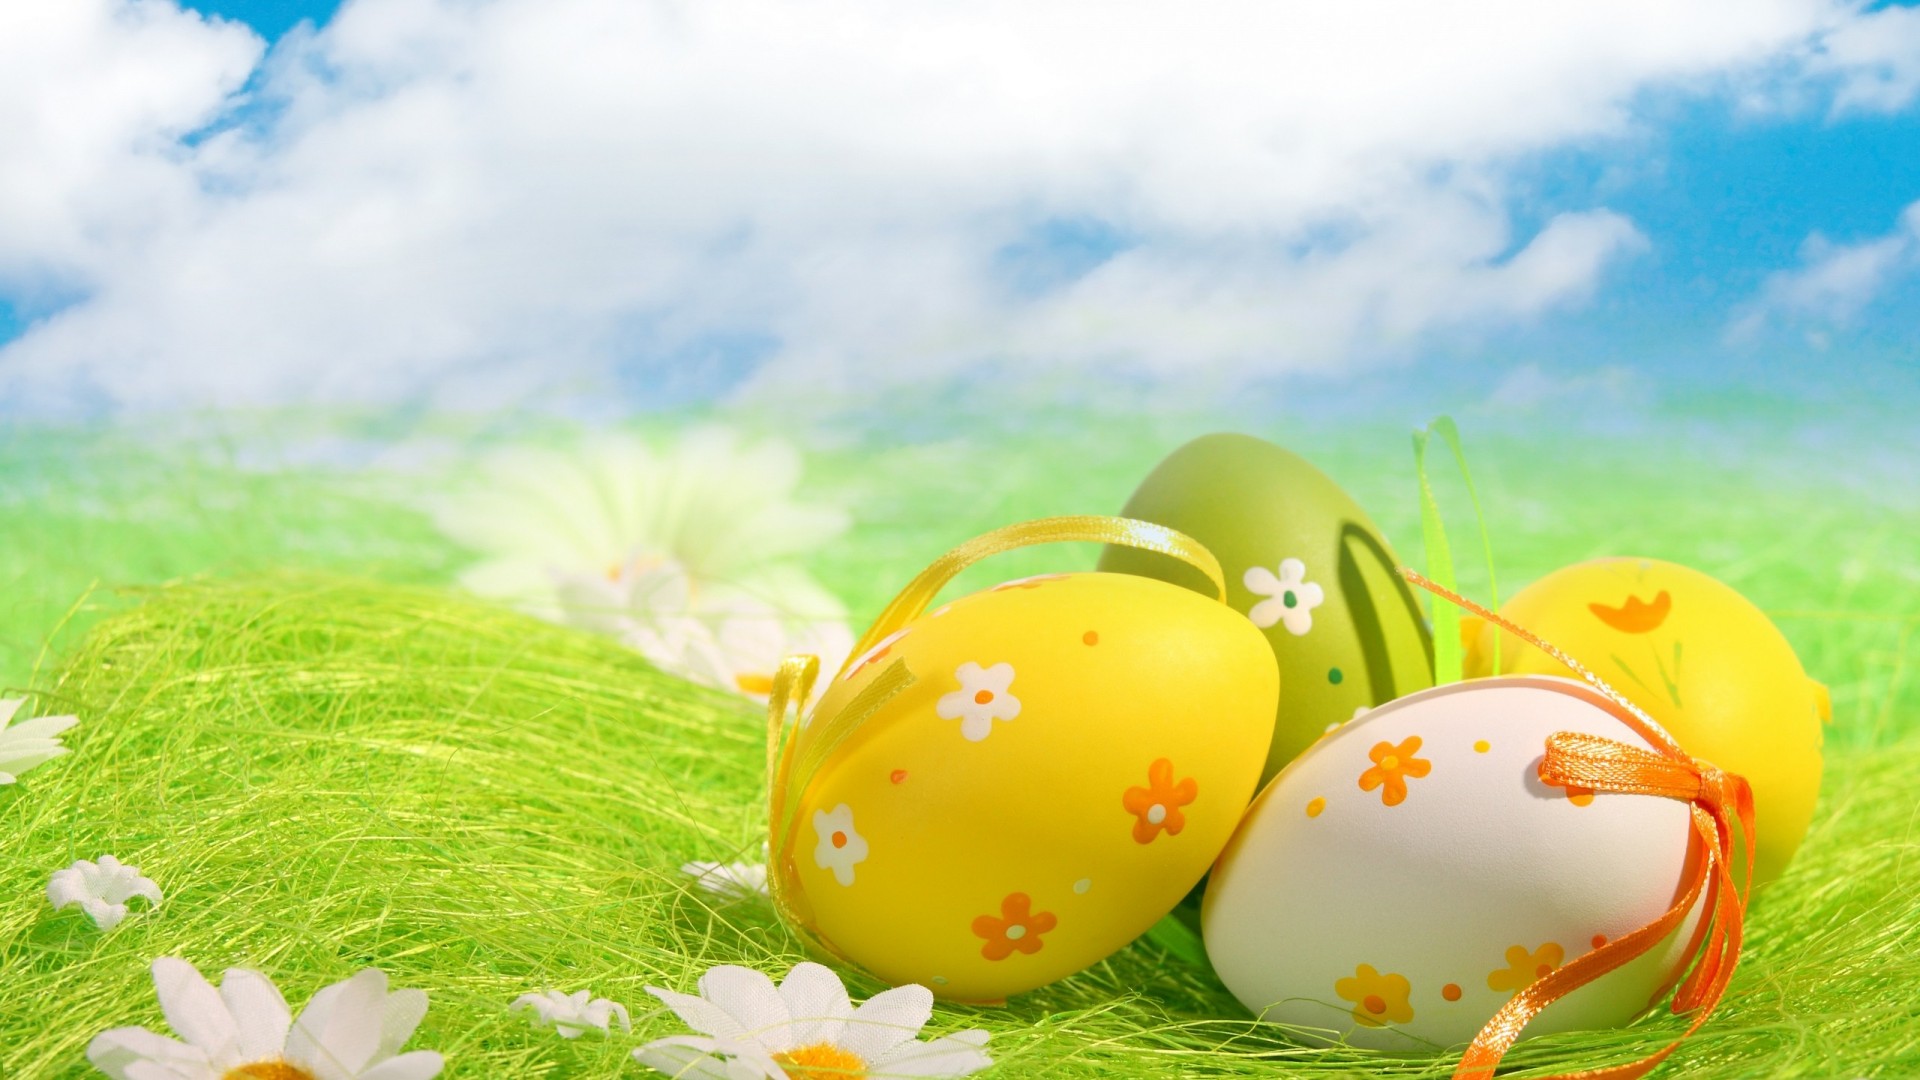 easter 2017 wallpapers hd